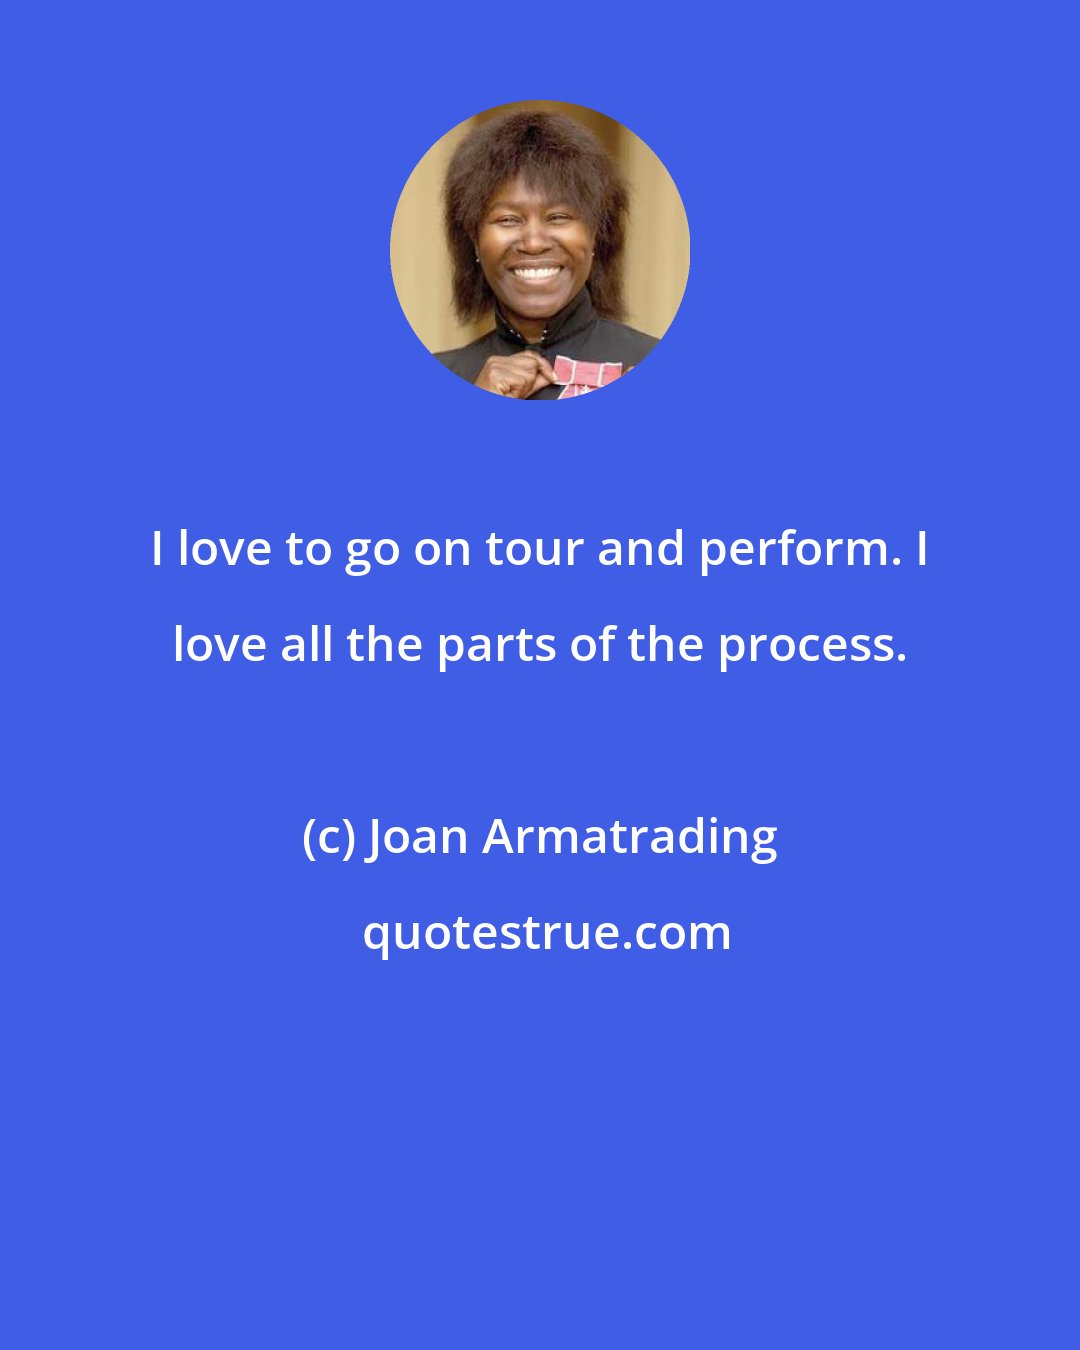 Joan Armatrading: I love to go on tour and perform. I love all the parts of the process.